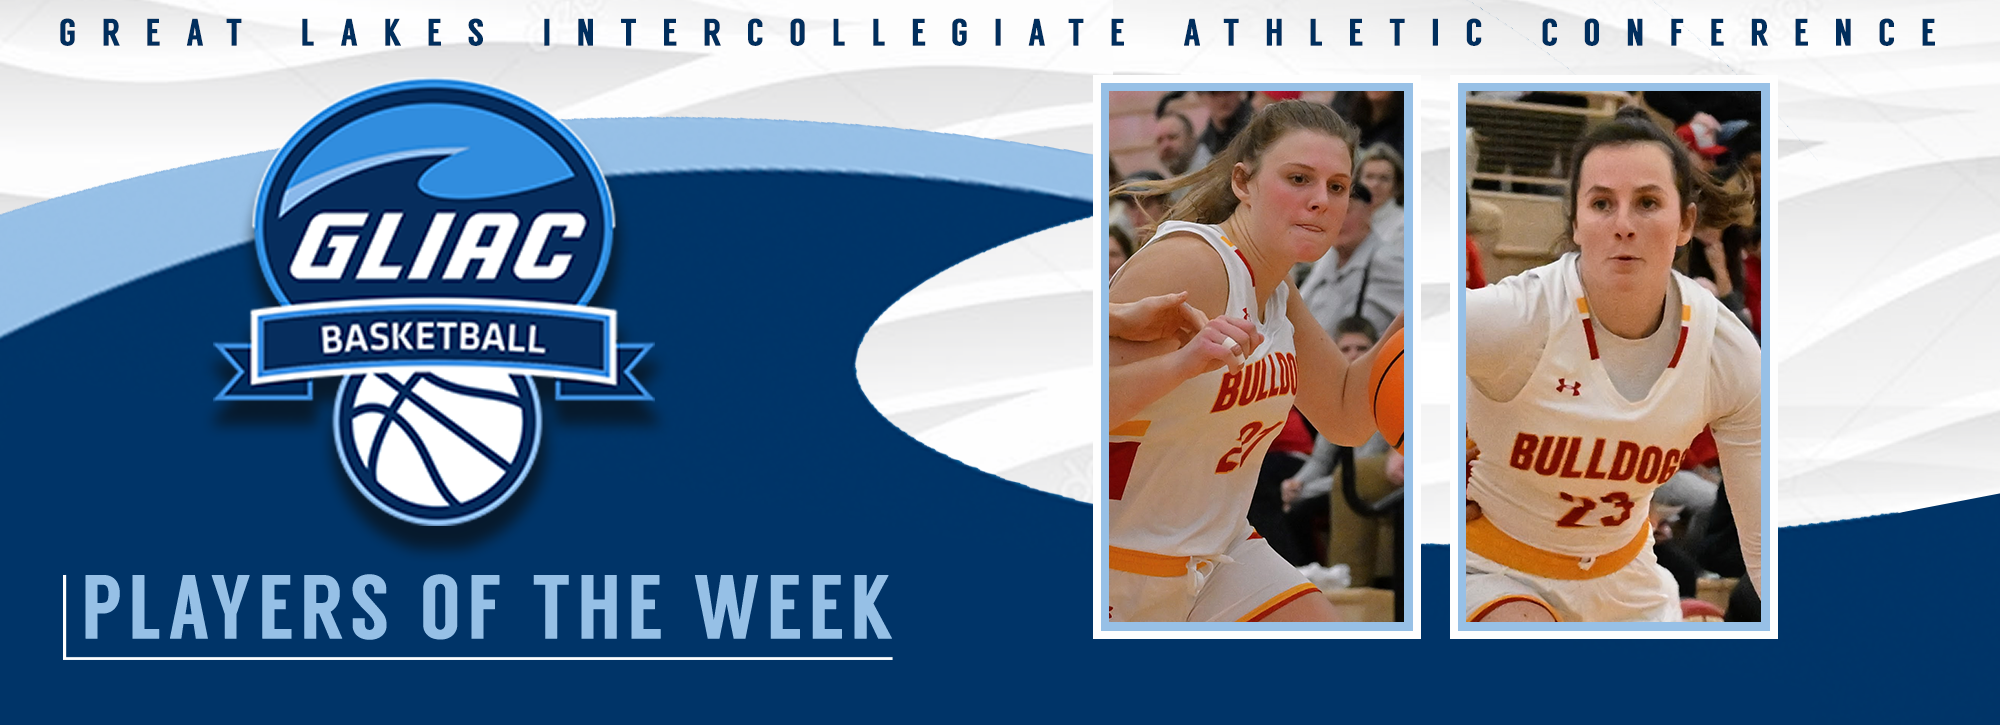 FSU's Blanchard and McCartney receive GLIAC women's basketball player of the week recognition